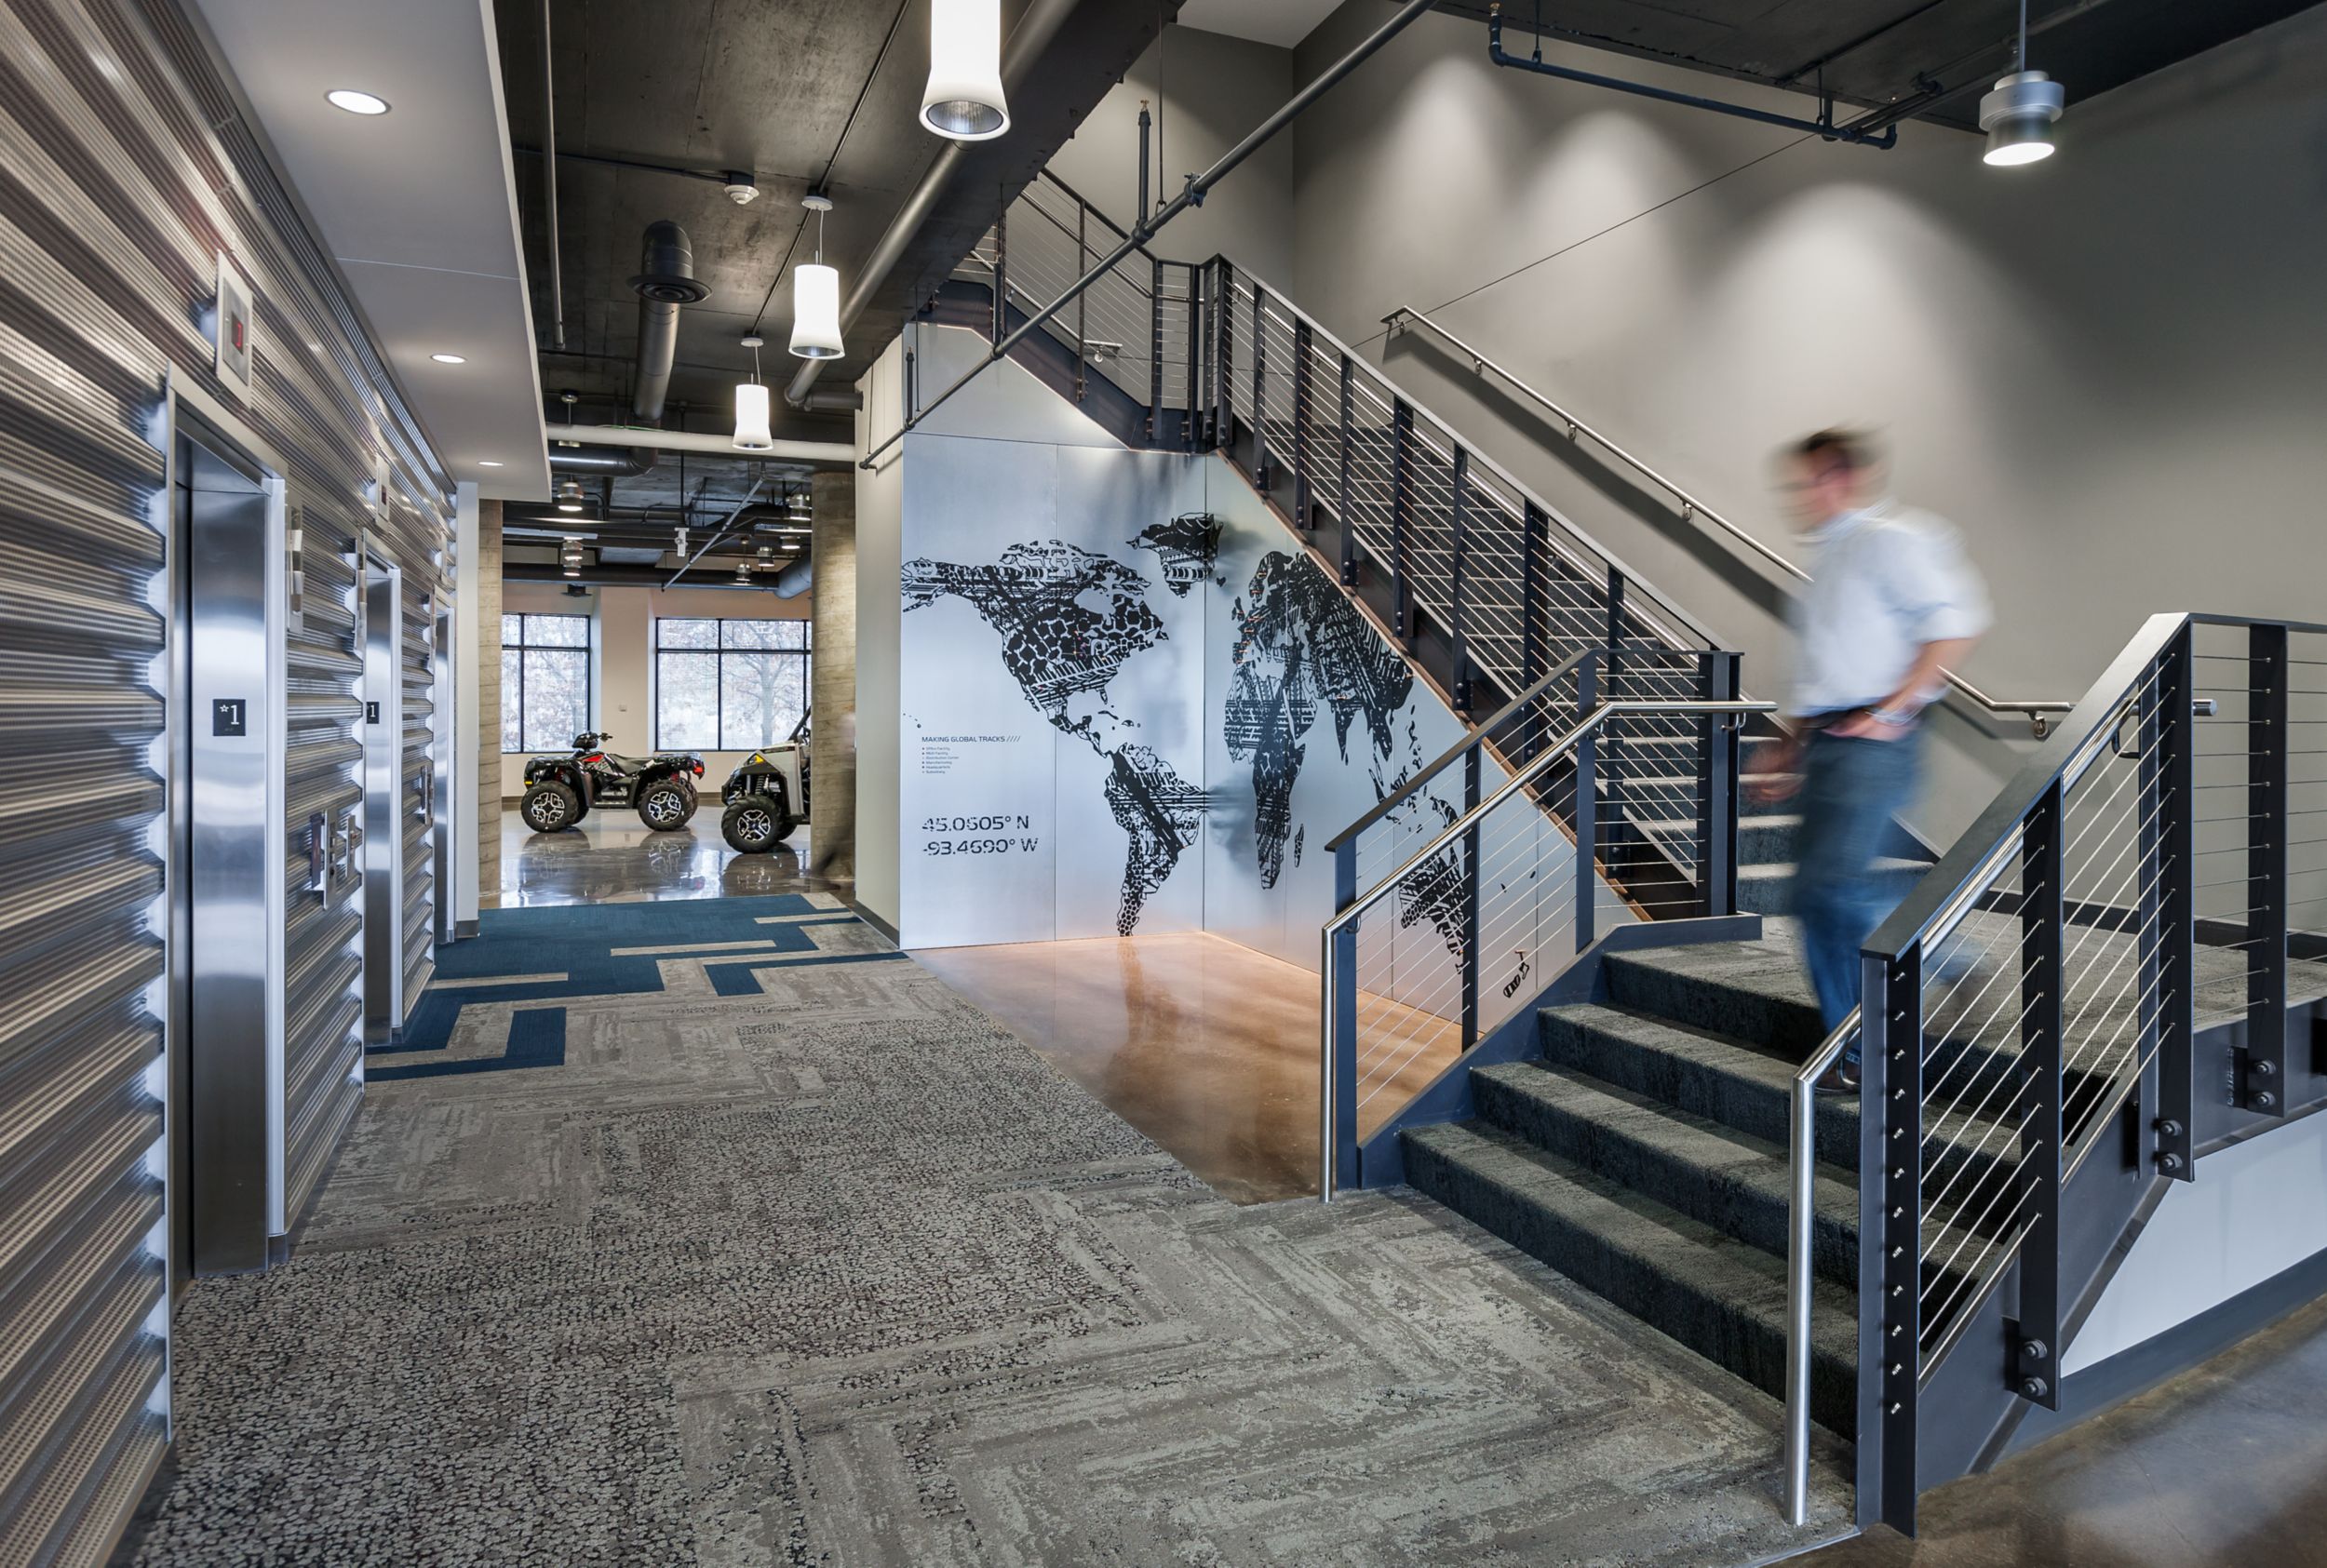 image Interface HN810, HN820, HN840 and HN850 plank carpet tiles in open stairwell with four wheelers in background at Polaris Industries numéro 6